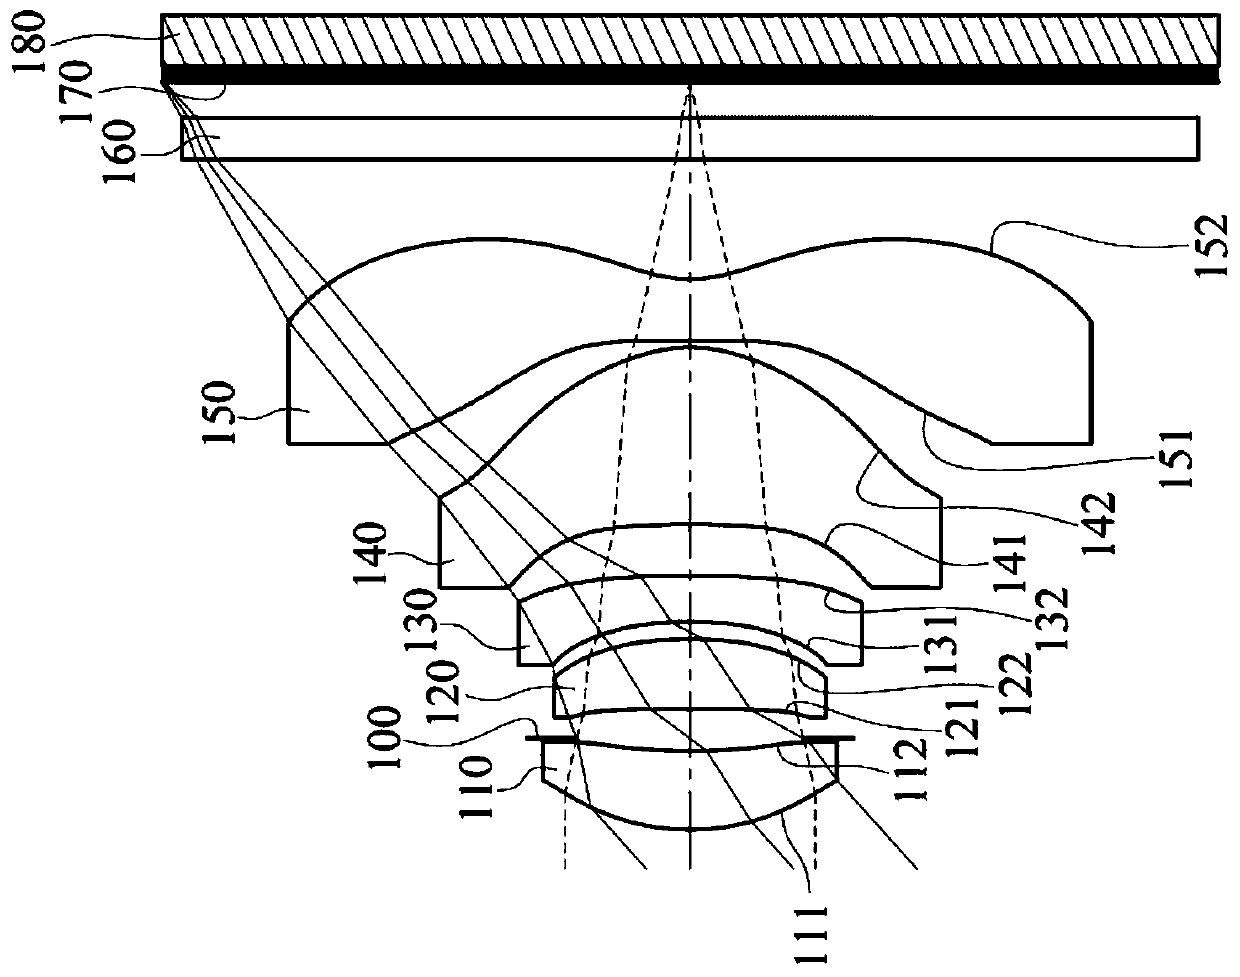 Image capture optical lens system, image capture device and electronic device